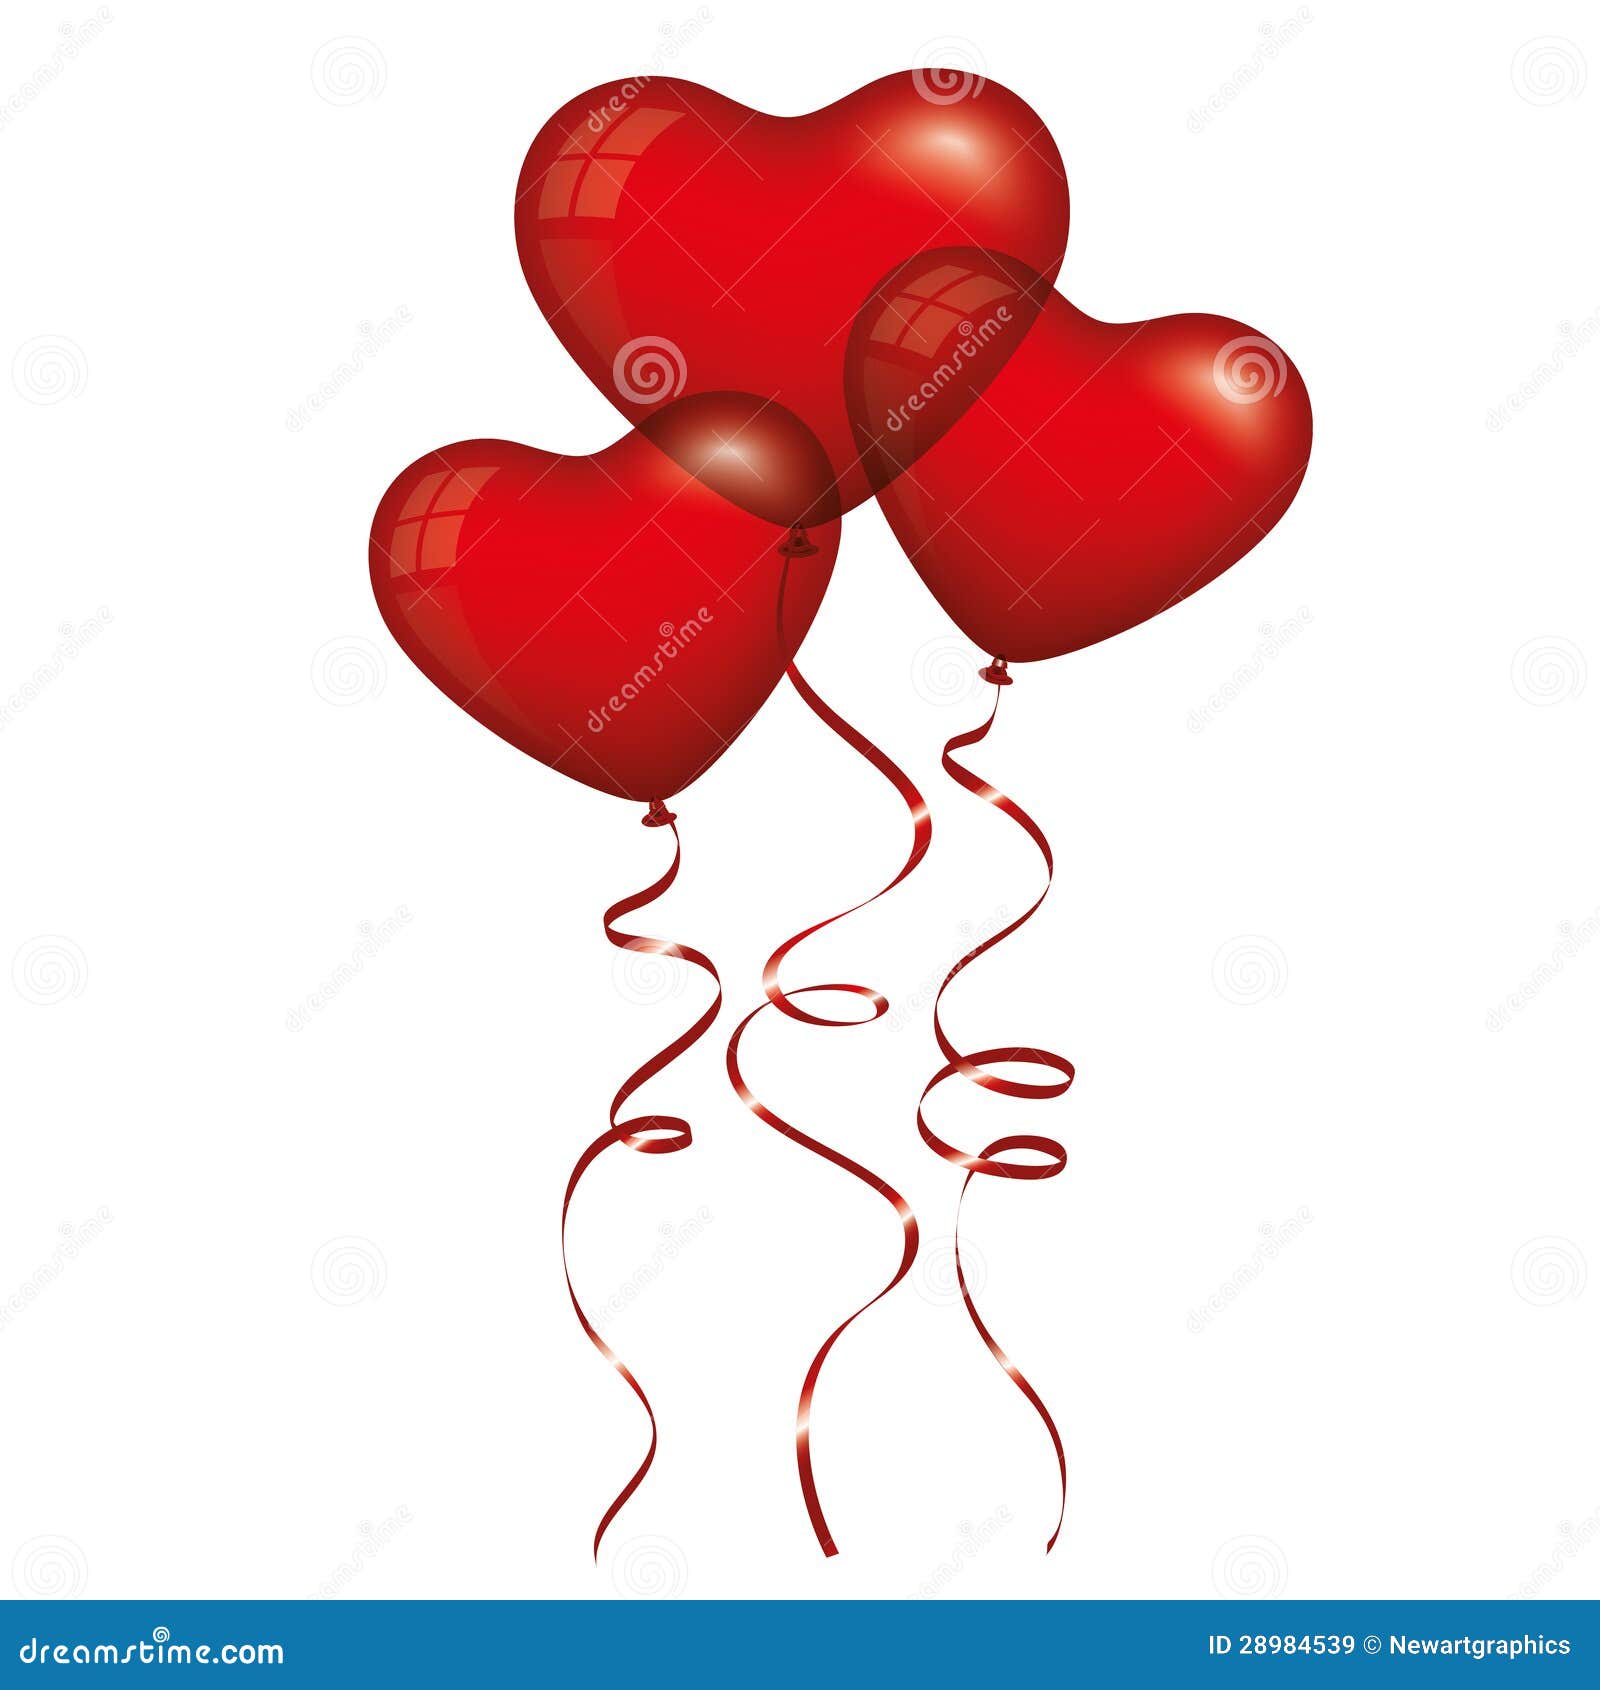 Red Heart Balloons Royalty Free Stock Images - Image: 289845391300 x 1390